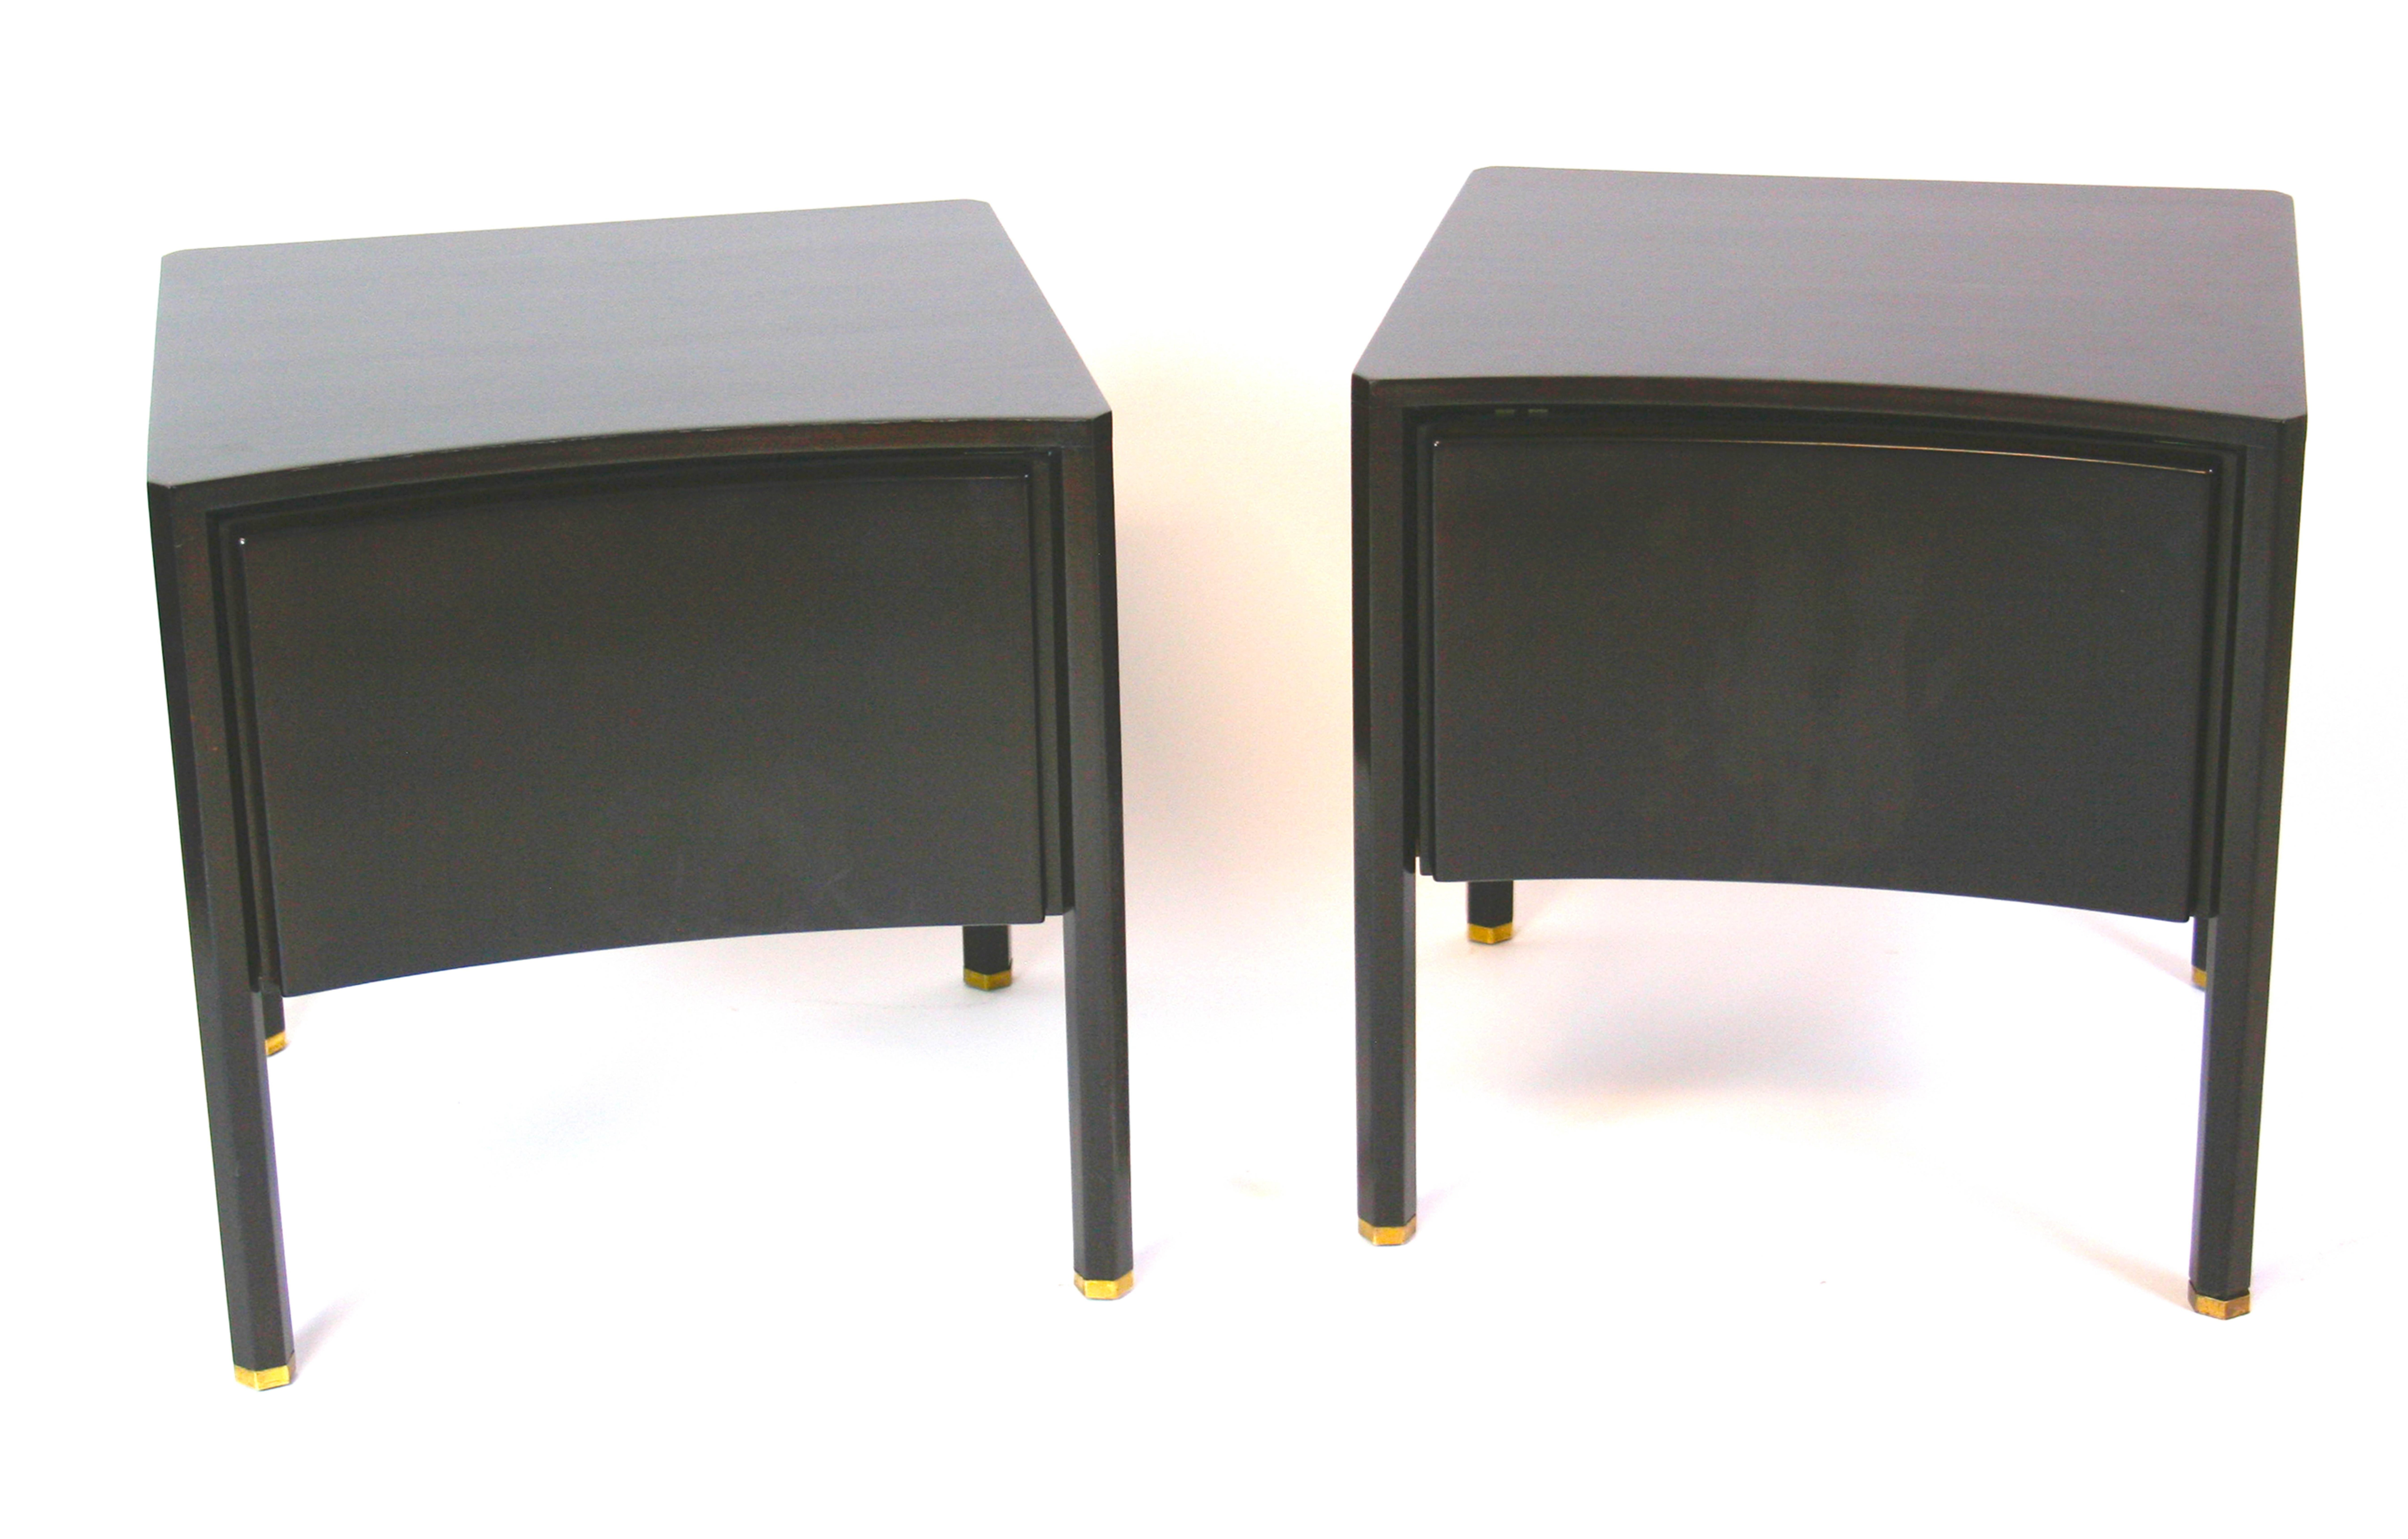 A rare pair of sculptural nightstands or side tables by Edmond Spence. Fantastic quality. concave front with a single door and hexagonal legs ending in brass sabot. Refinished in an ebonized mahogany.